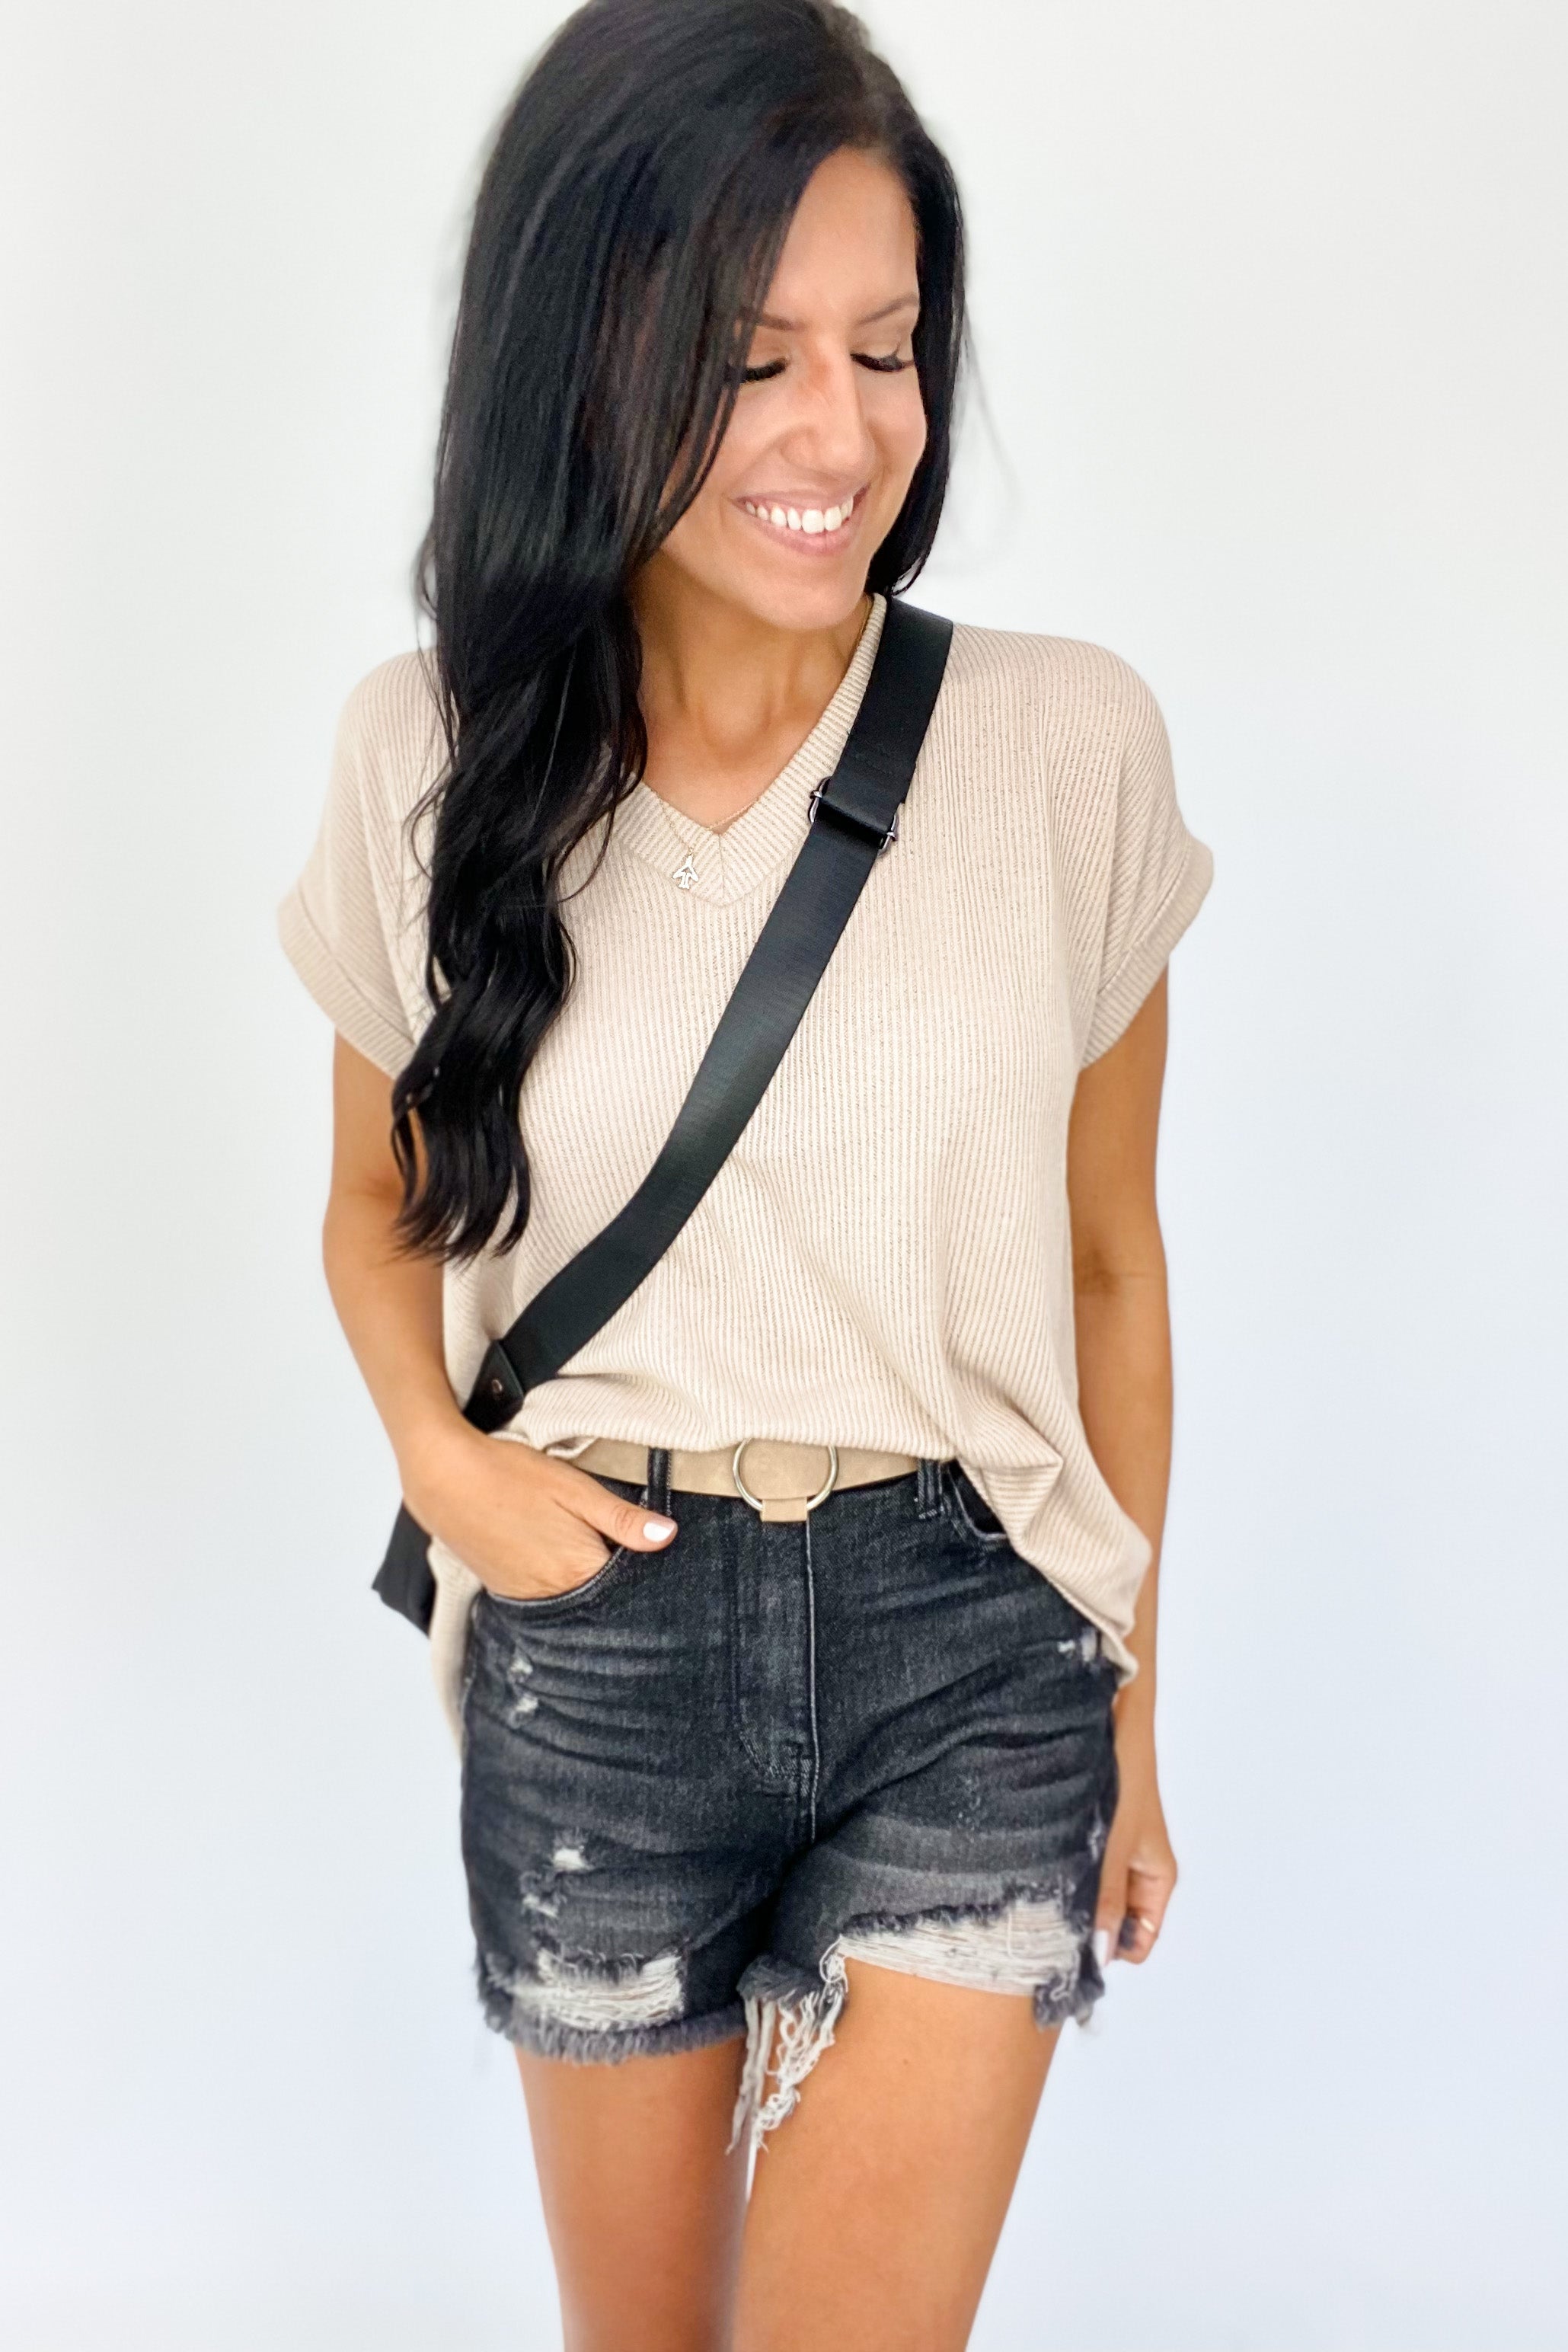 ABBY HIGH RISE DISTRESSED SHORTS BY RISEN IN BLACK - FINAL SALE